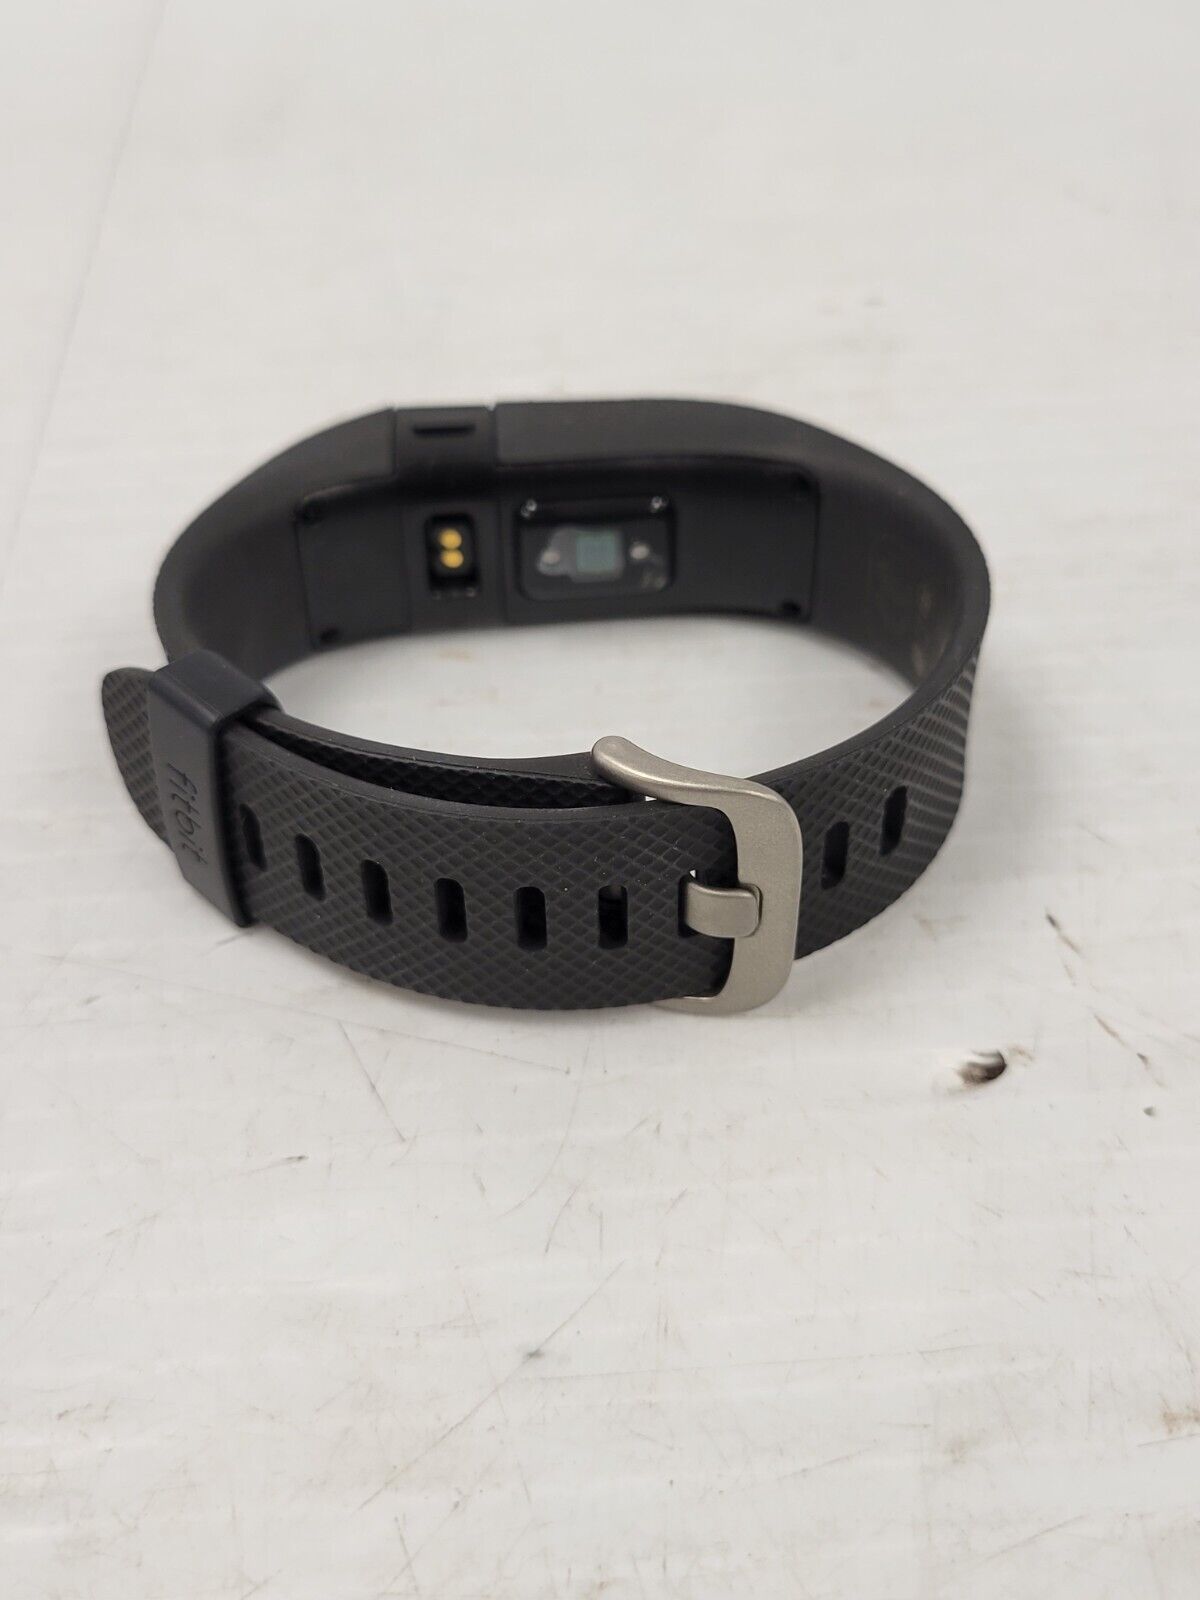 (I-33660) Fitbit FB405 Activity Monitor Smart Watch